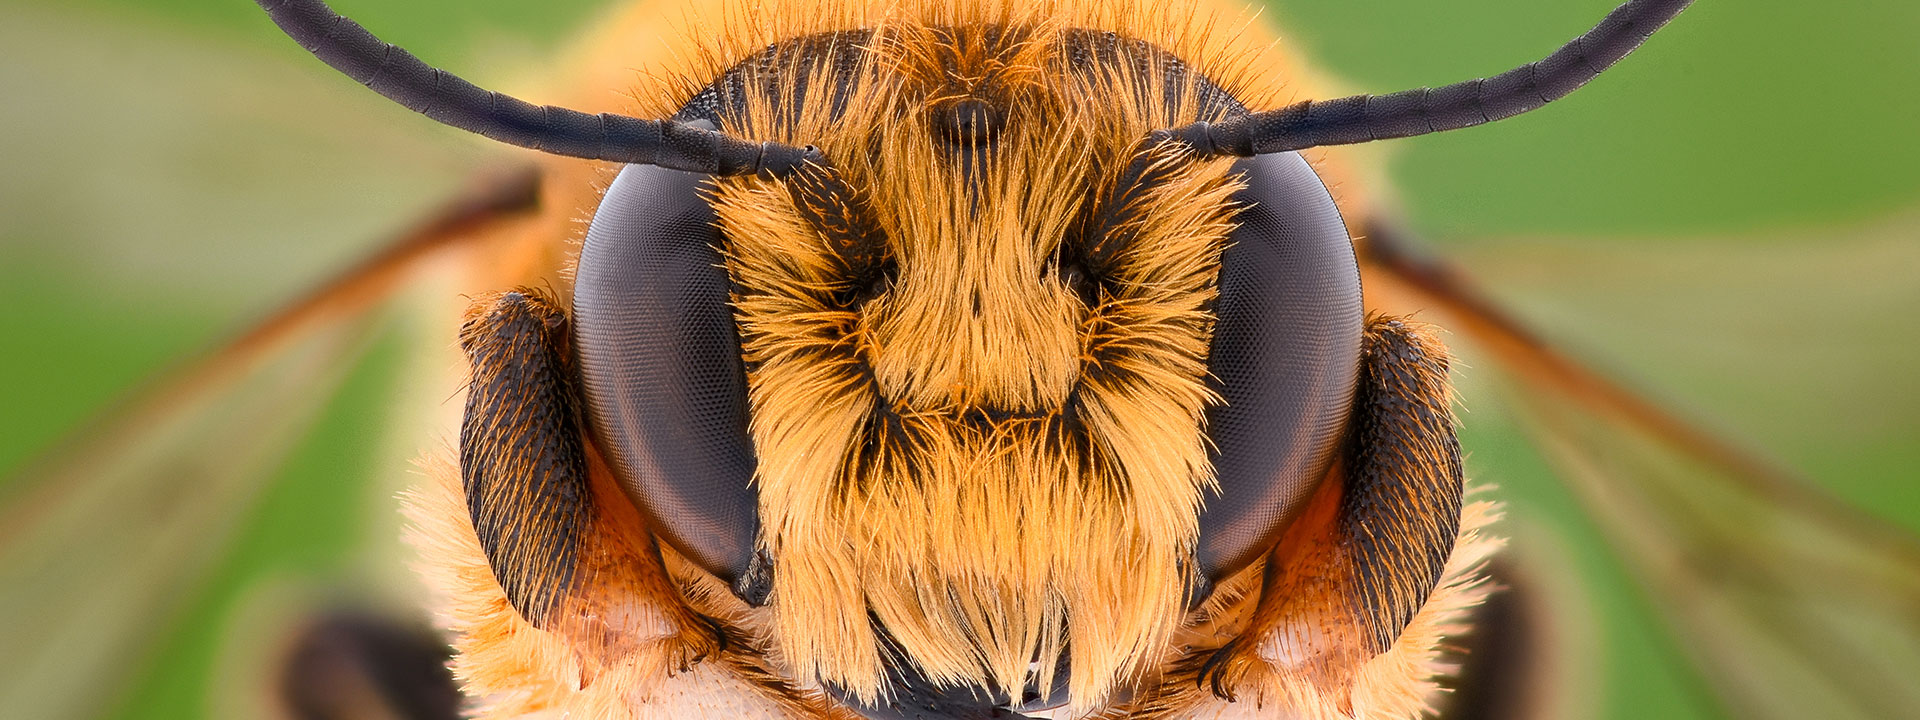 Closeup of a bee's eyes.